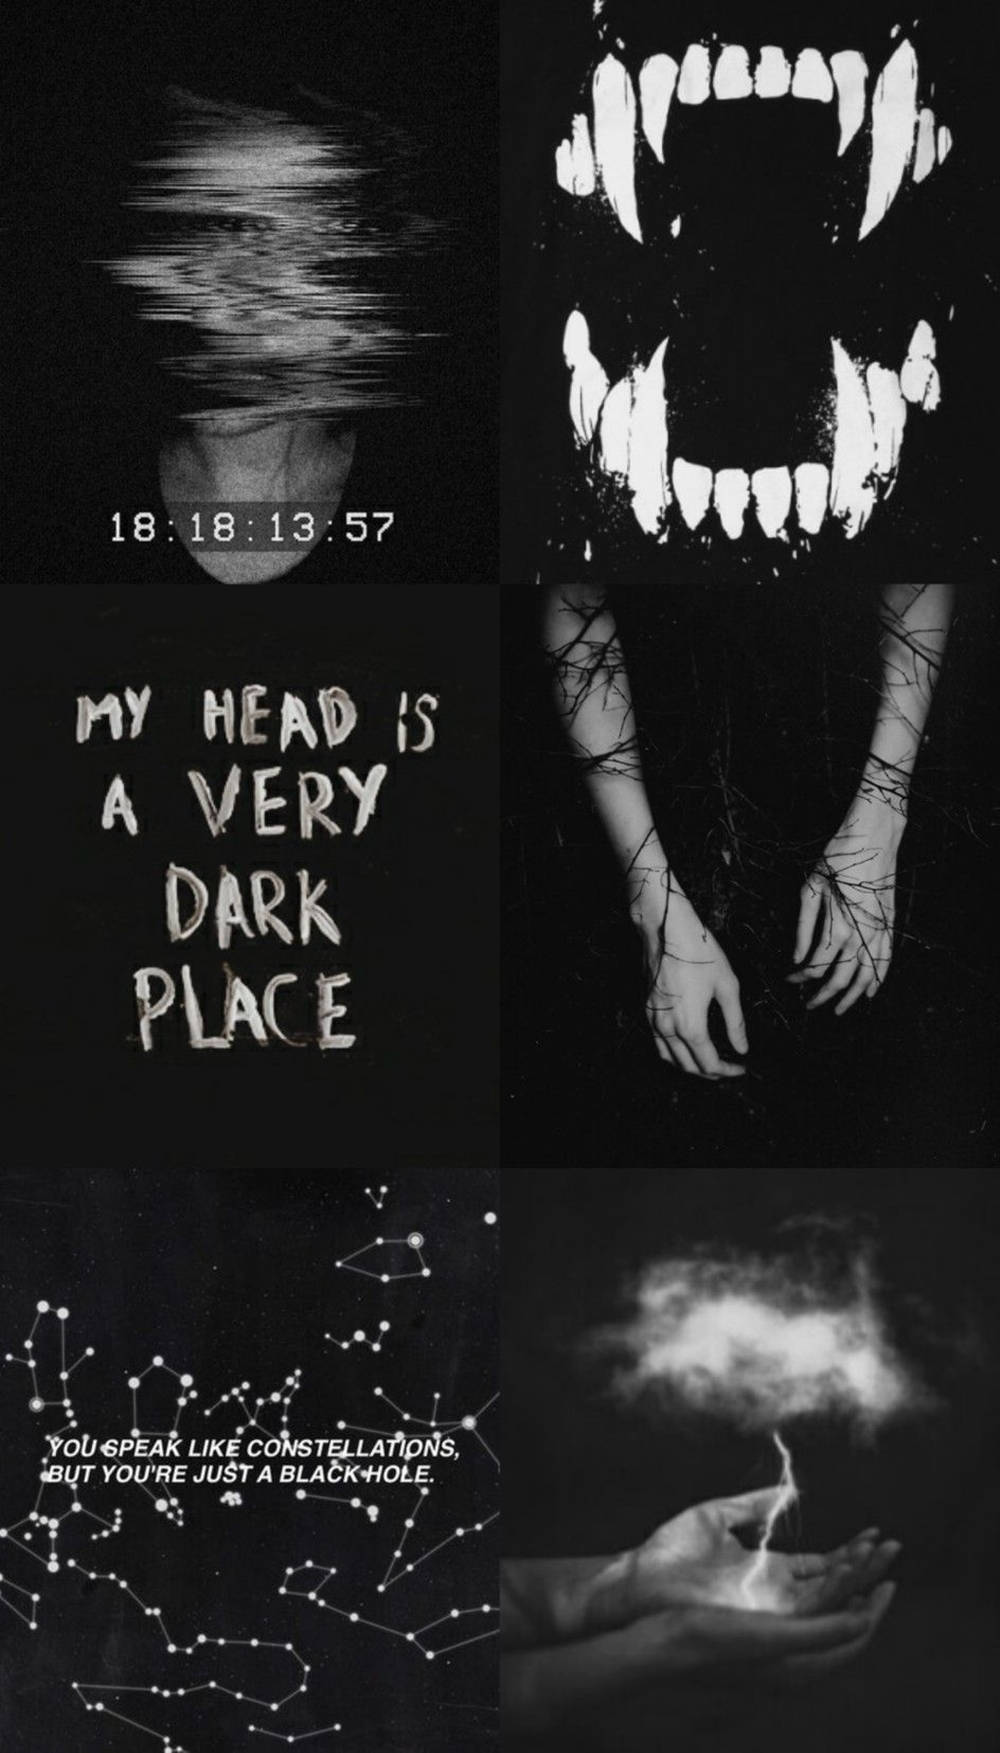 A collage of black and white images with teeth - Sad, creepy, emo